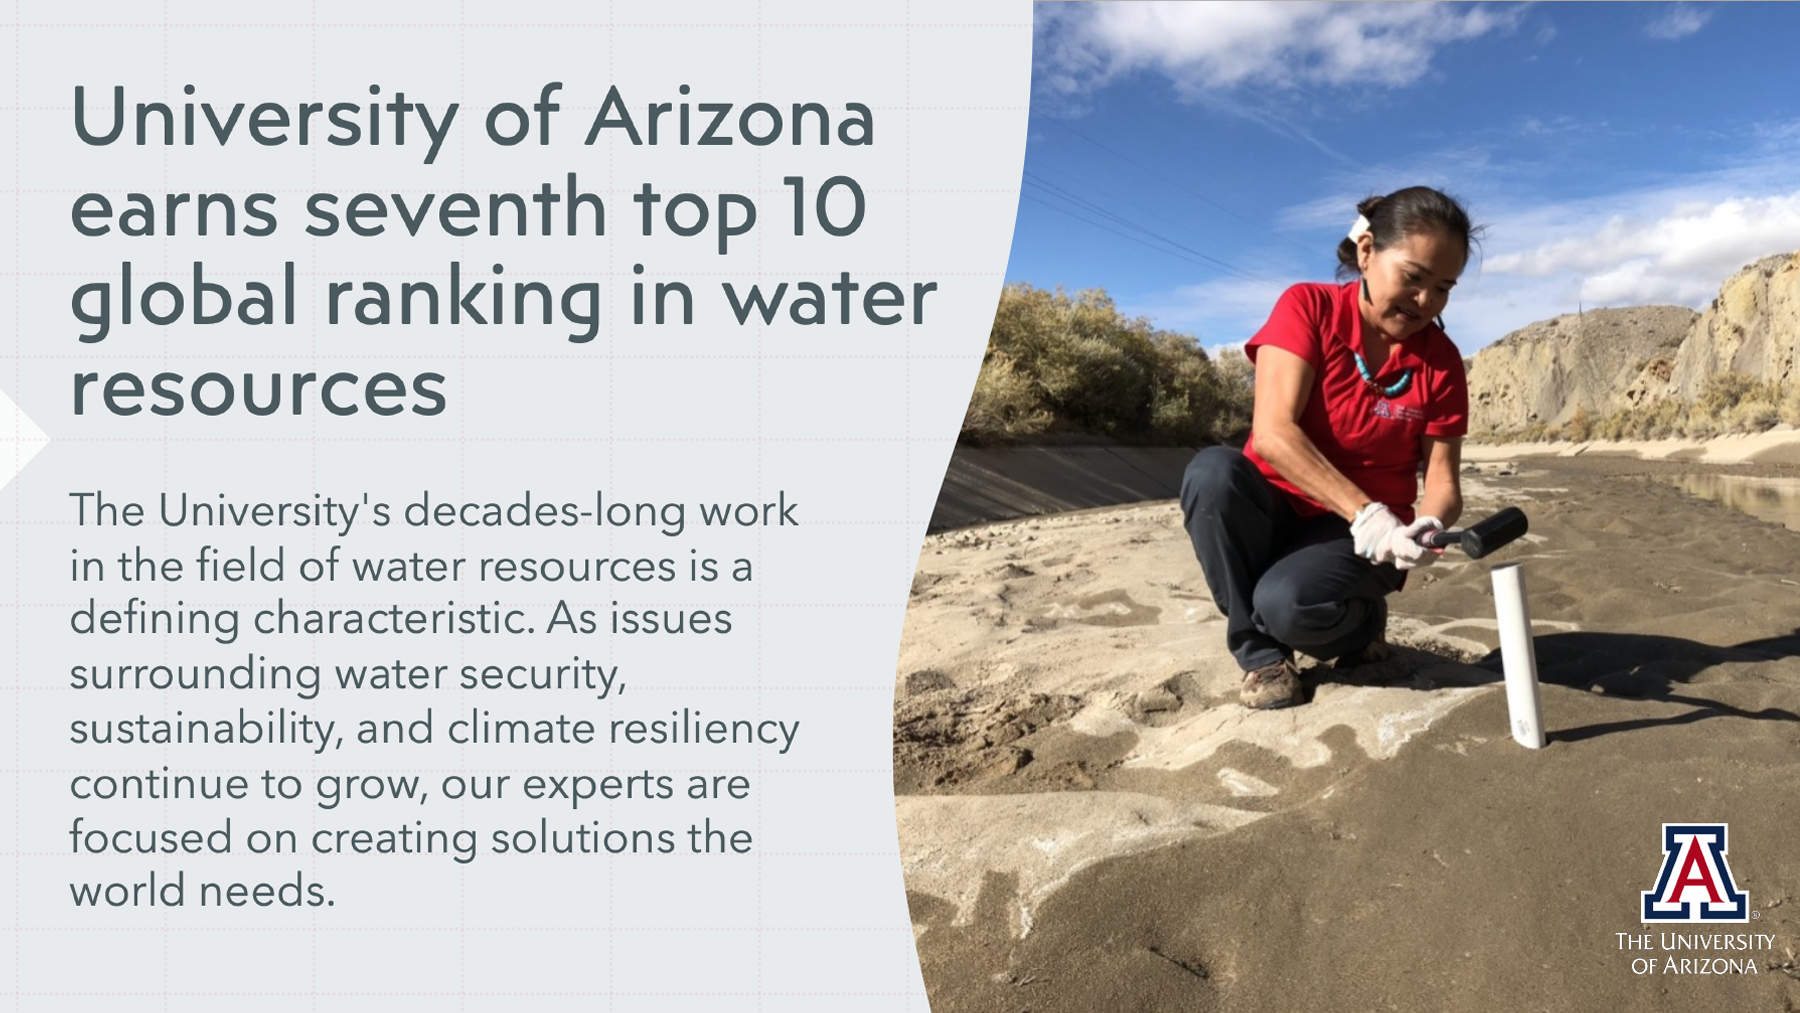 University of Arizona earns seventh top 10 global ranking in water resources